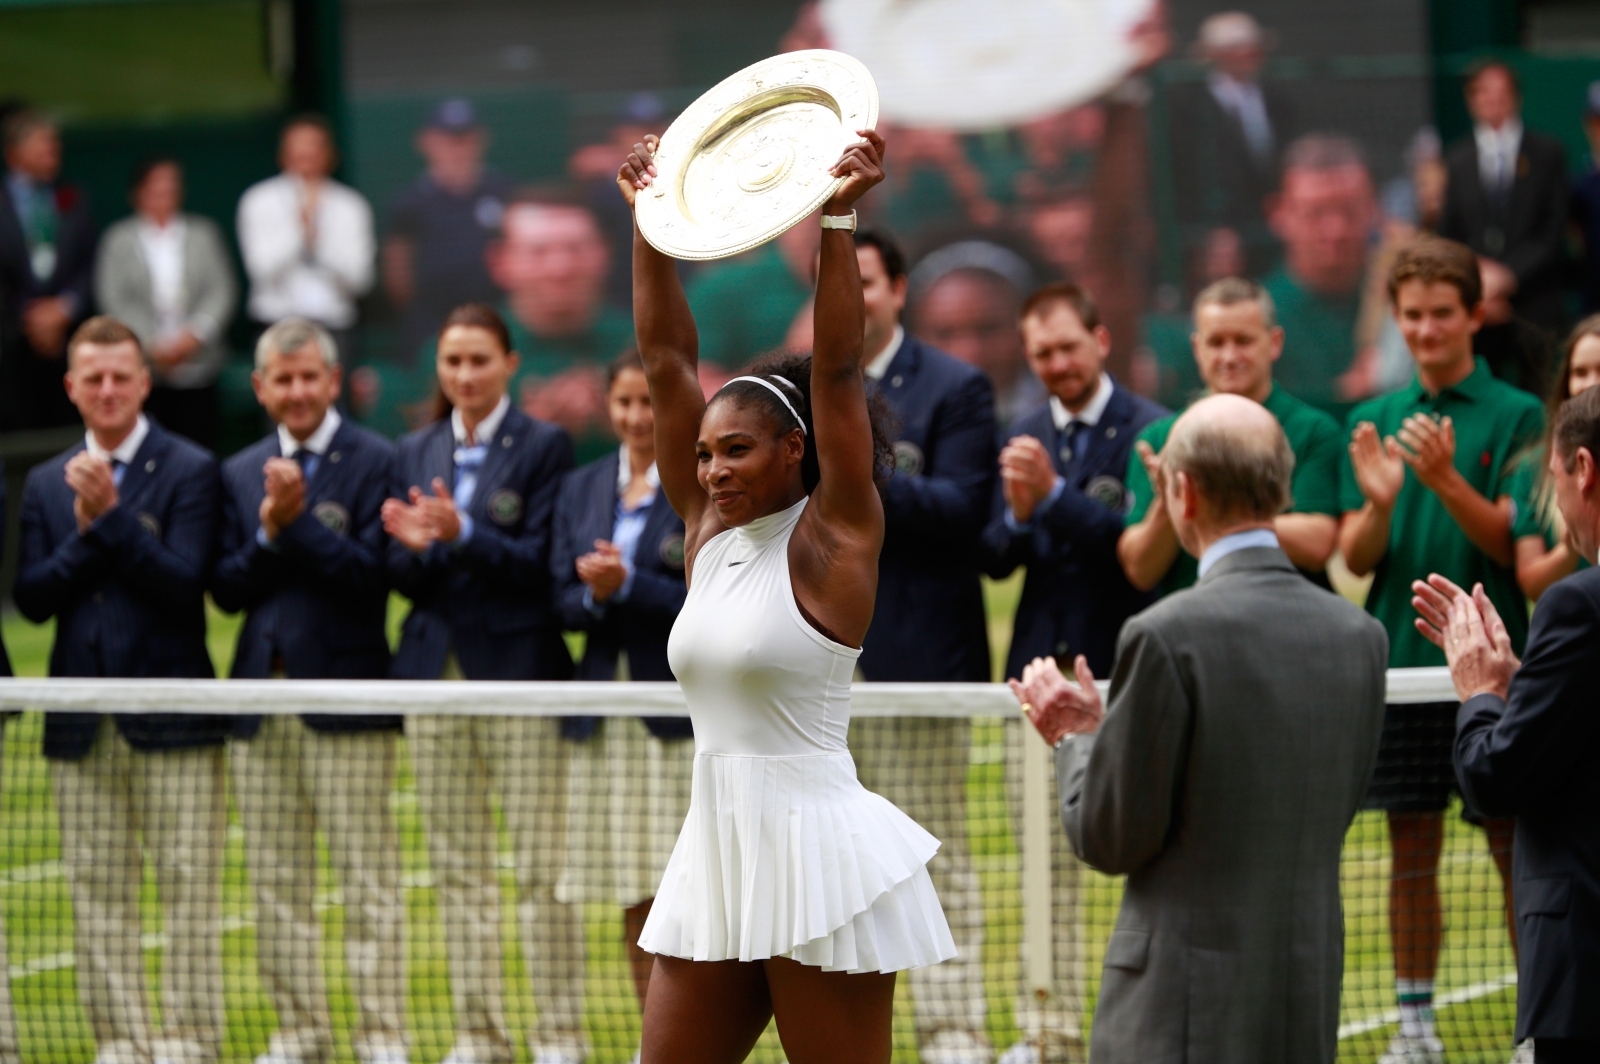 Wimbledon 2016: Serena Williams beats Angelique Kerber to seal 7th title and equal ...